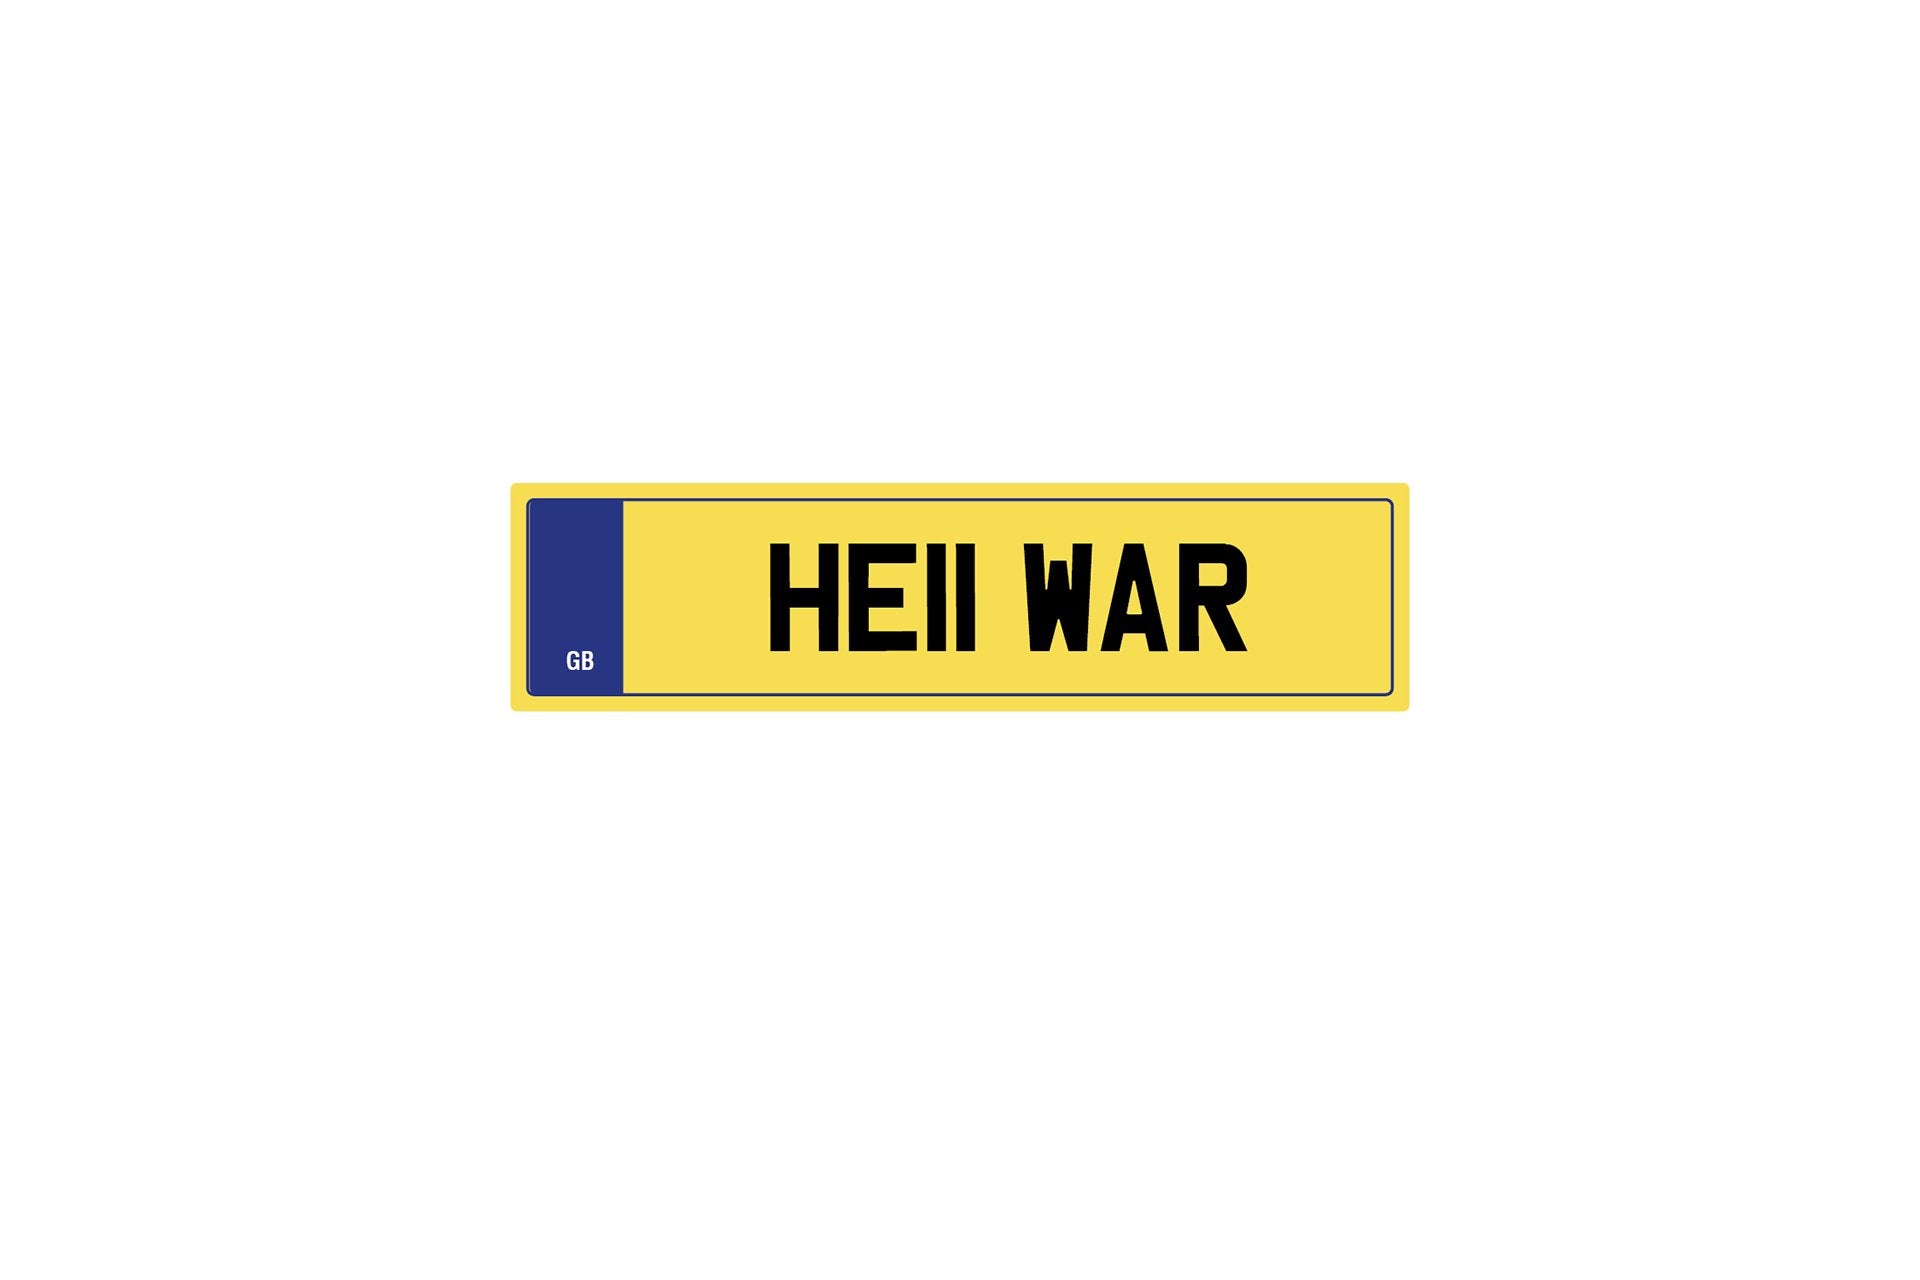 Private Plate He11 War by Kahn - Image 235